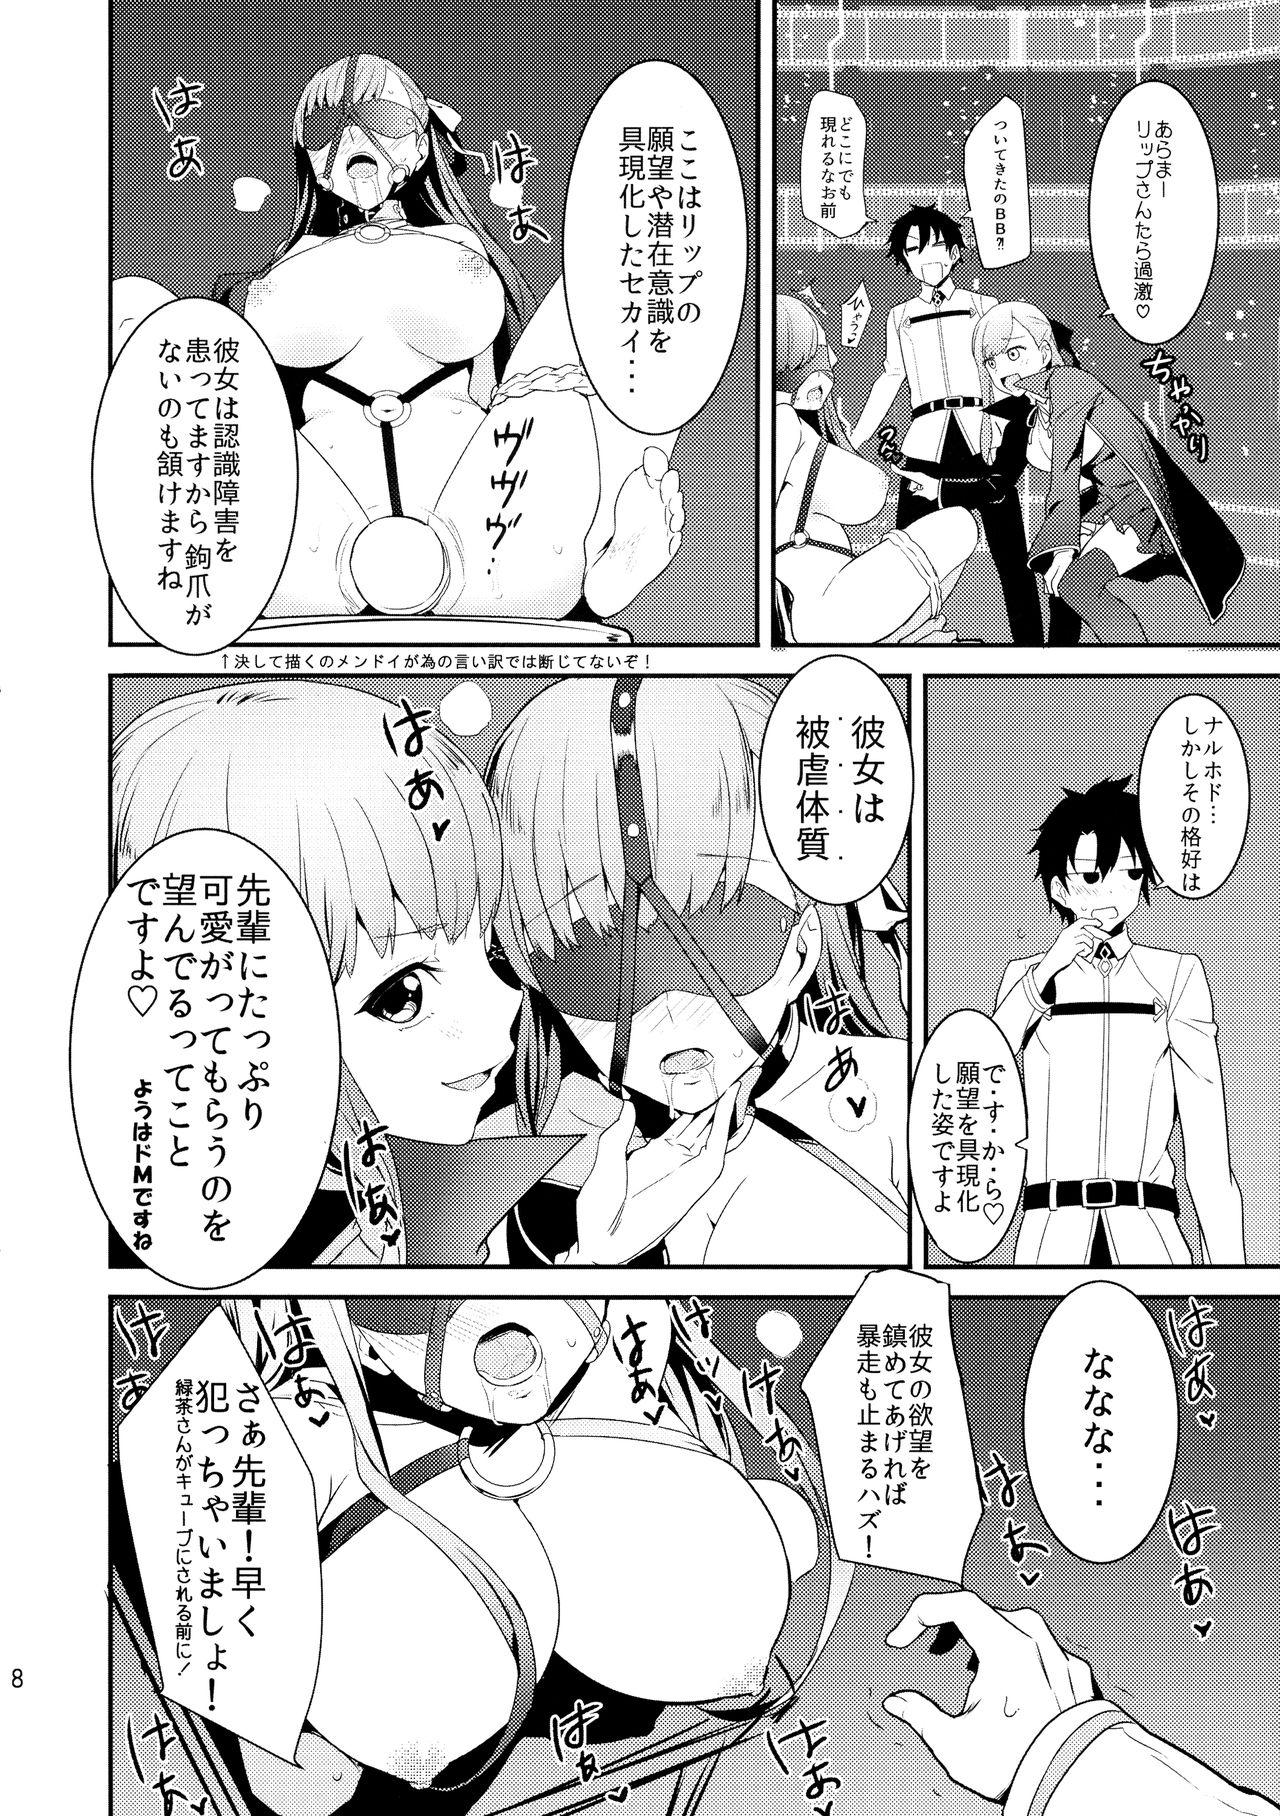 Clothed In the Passion, Melty heart. 1 - Fate grand order Dyke - Page 10